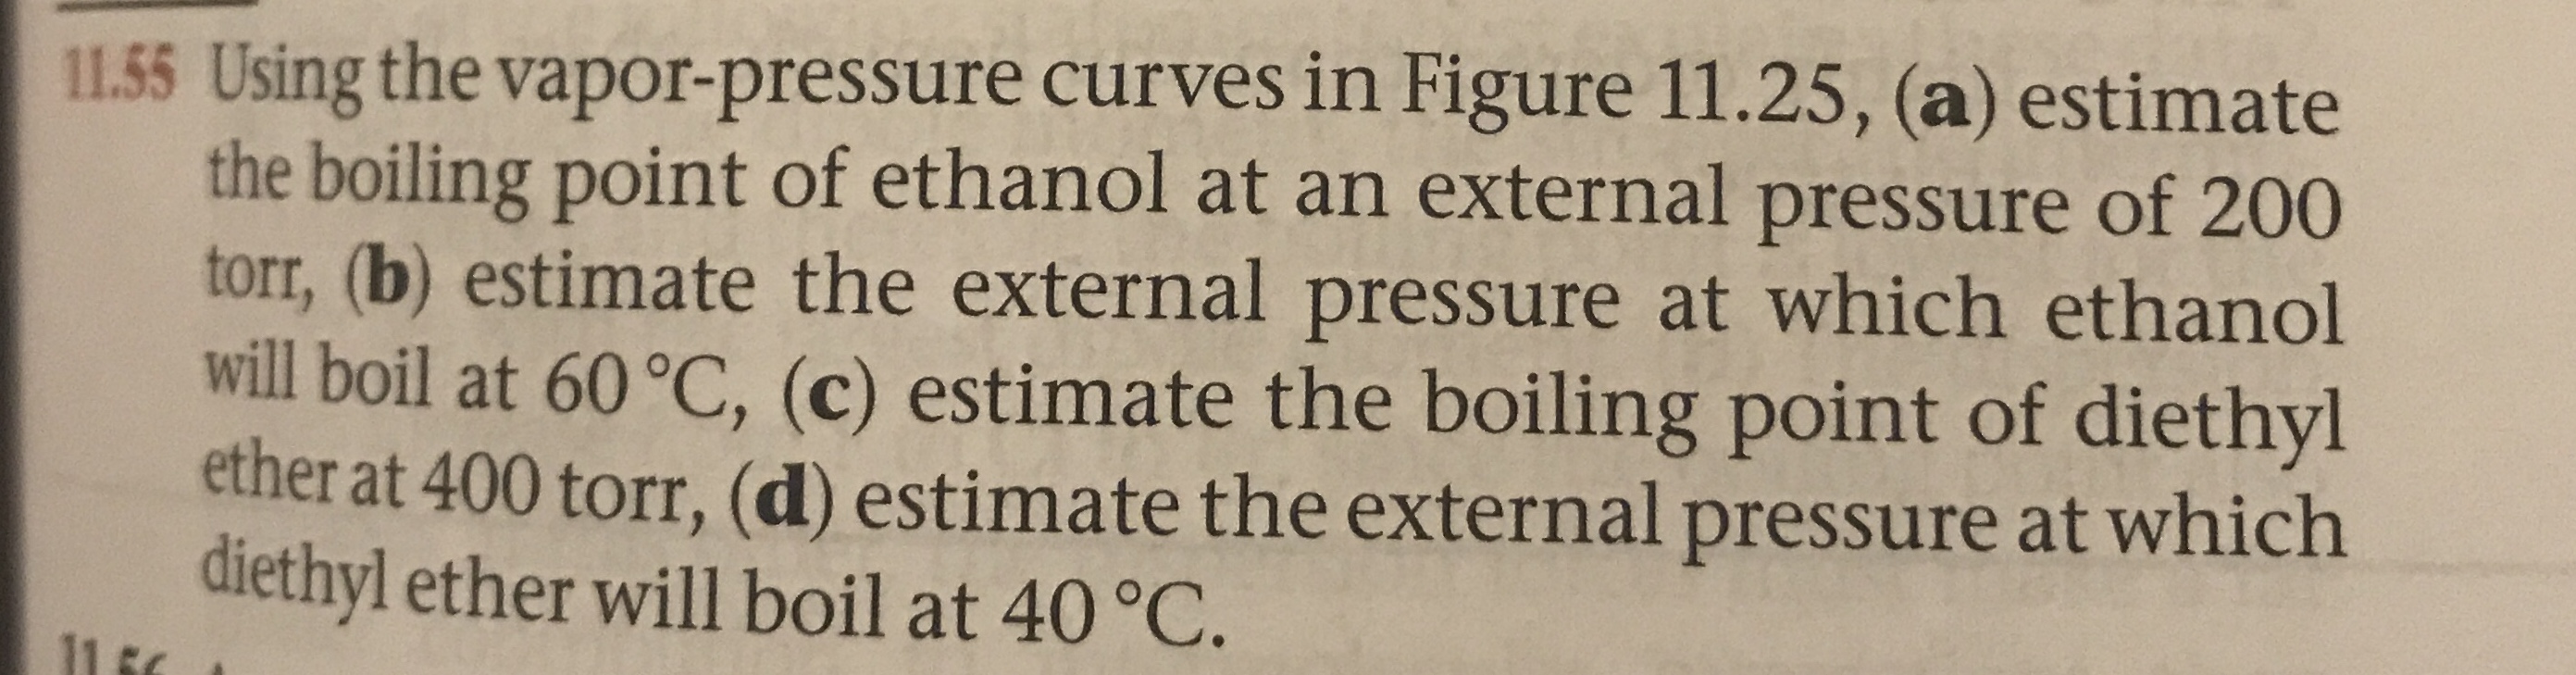 11.55 Using the vapor-pressure curves in Figure 11.25, (a) estimate
the boiling point of ethanol at an external pressure of 200
torr, (b) estimate the external pressure at which ethanol
will boil at 60 °C, (c) estimate the boiling point of diethyl
ether at 400 torr, (d) estimate the external pressure at which
diethyl ether will boil at 40 °C.
11 F
